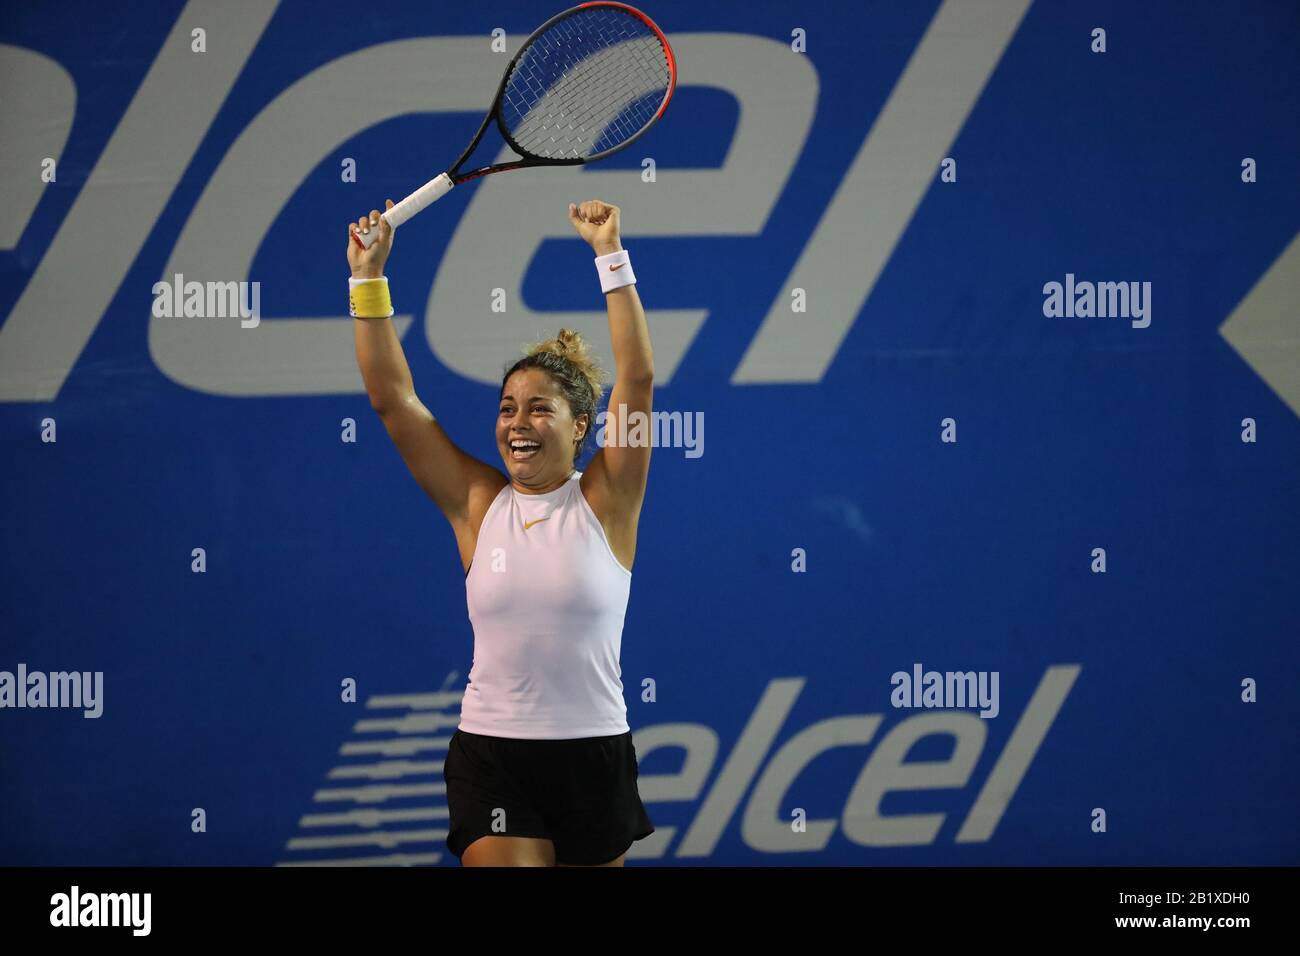 Acapulco, Mexico. 27th Feb, 2020. Mexican Renata Zarazua celebrates after  winning against the Slovenian Tamara Zindansek, during a match of the  Mexican Tennis Open held in Acapulco, in the state of Guerrero,